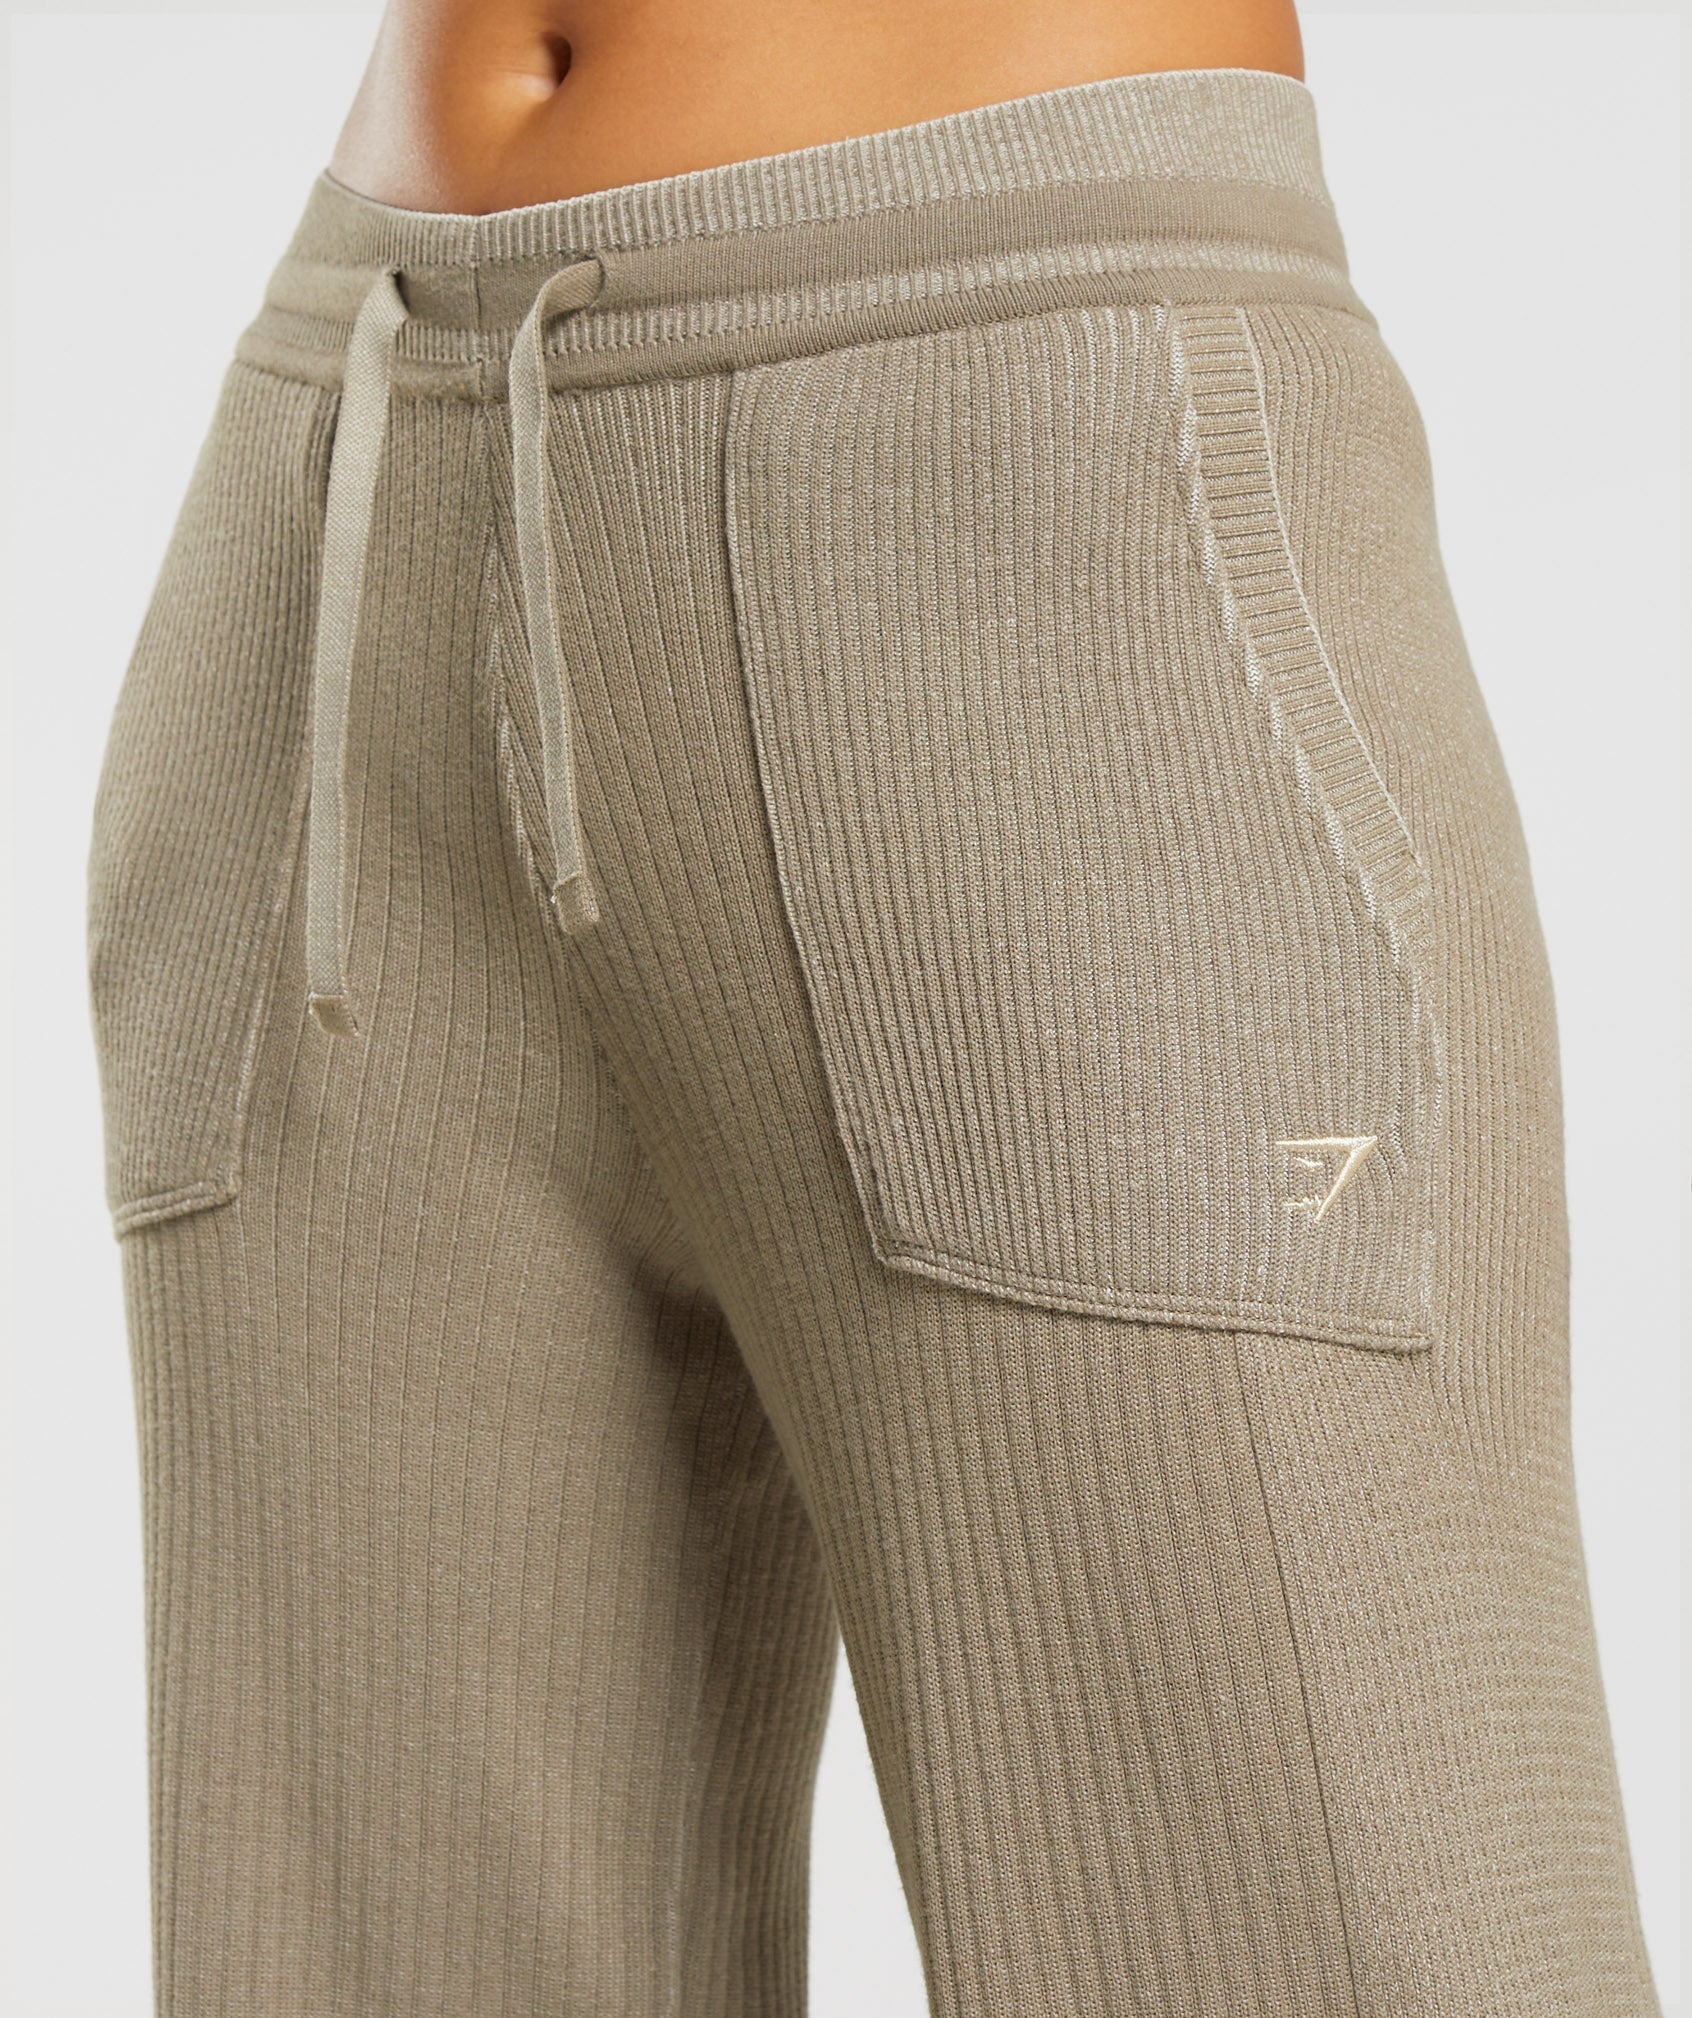 Pause Knitwear Joggers in Cement Brown/Pebble Grey - view 6